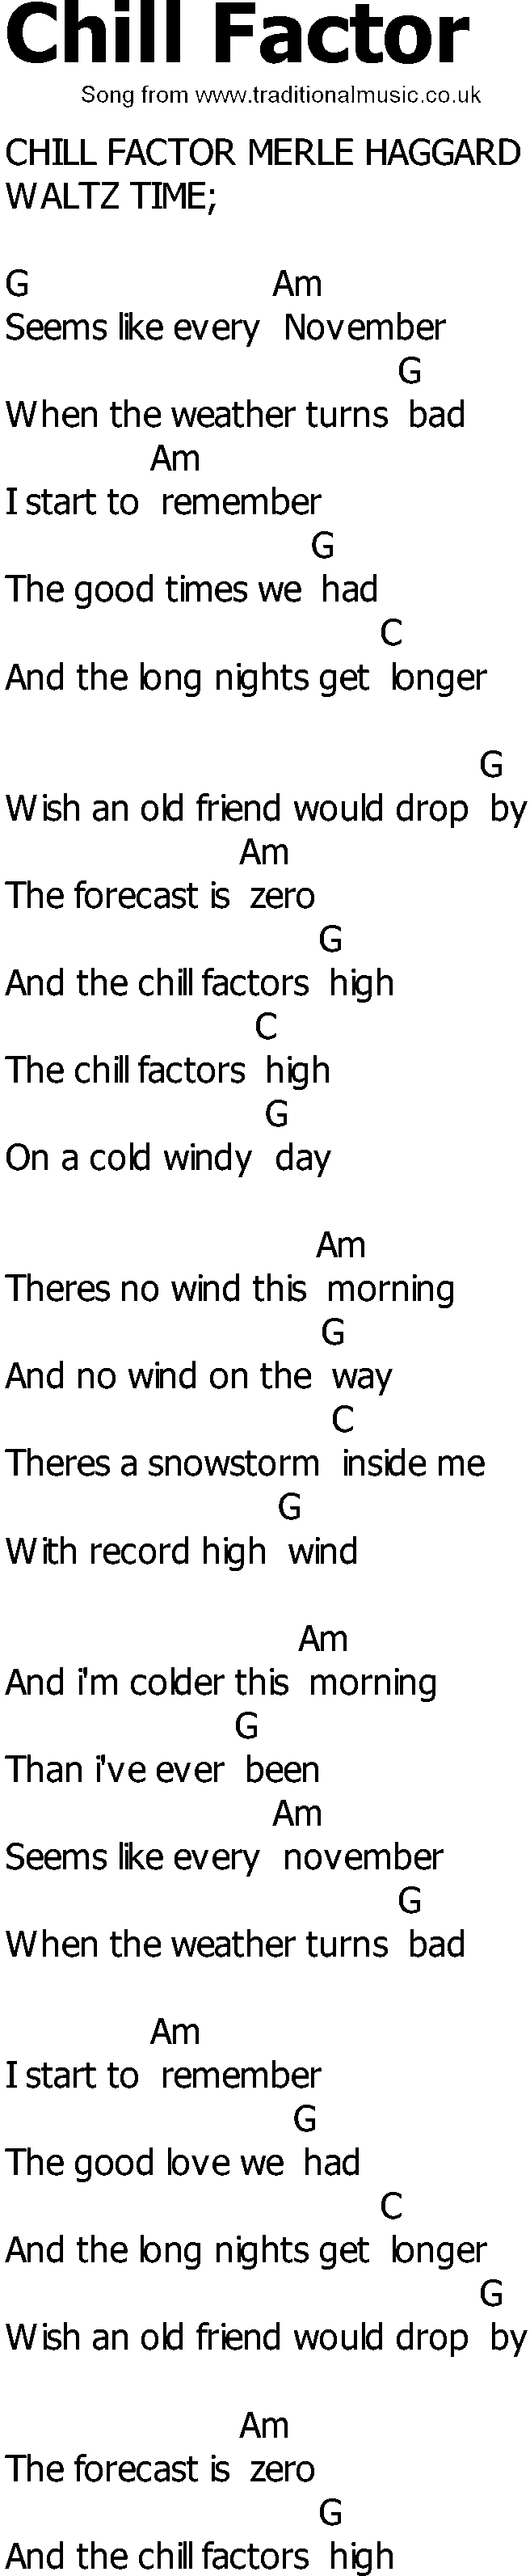 Old Country song lyrics with chords - Chill Factor